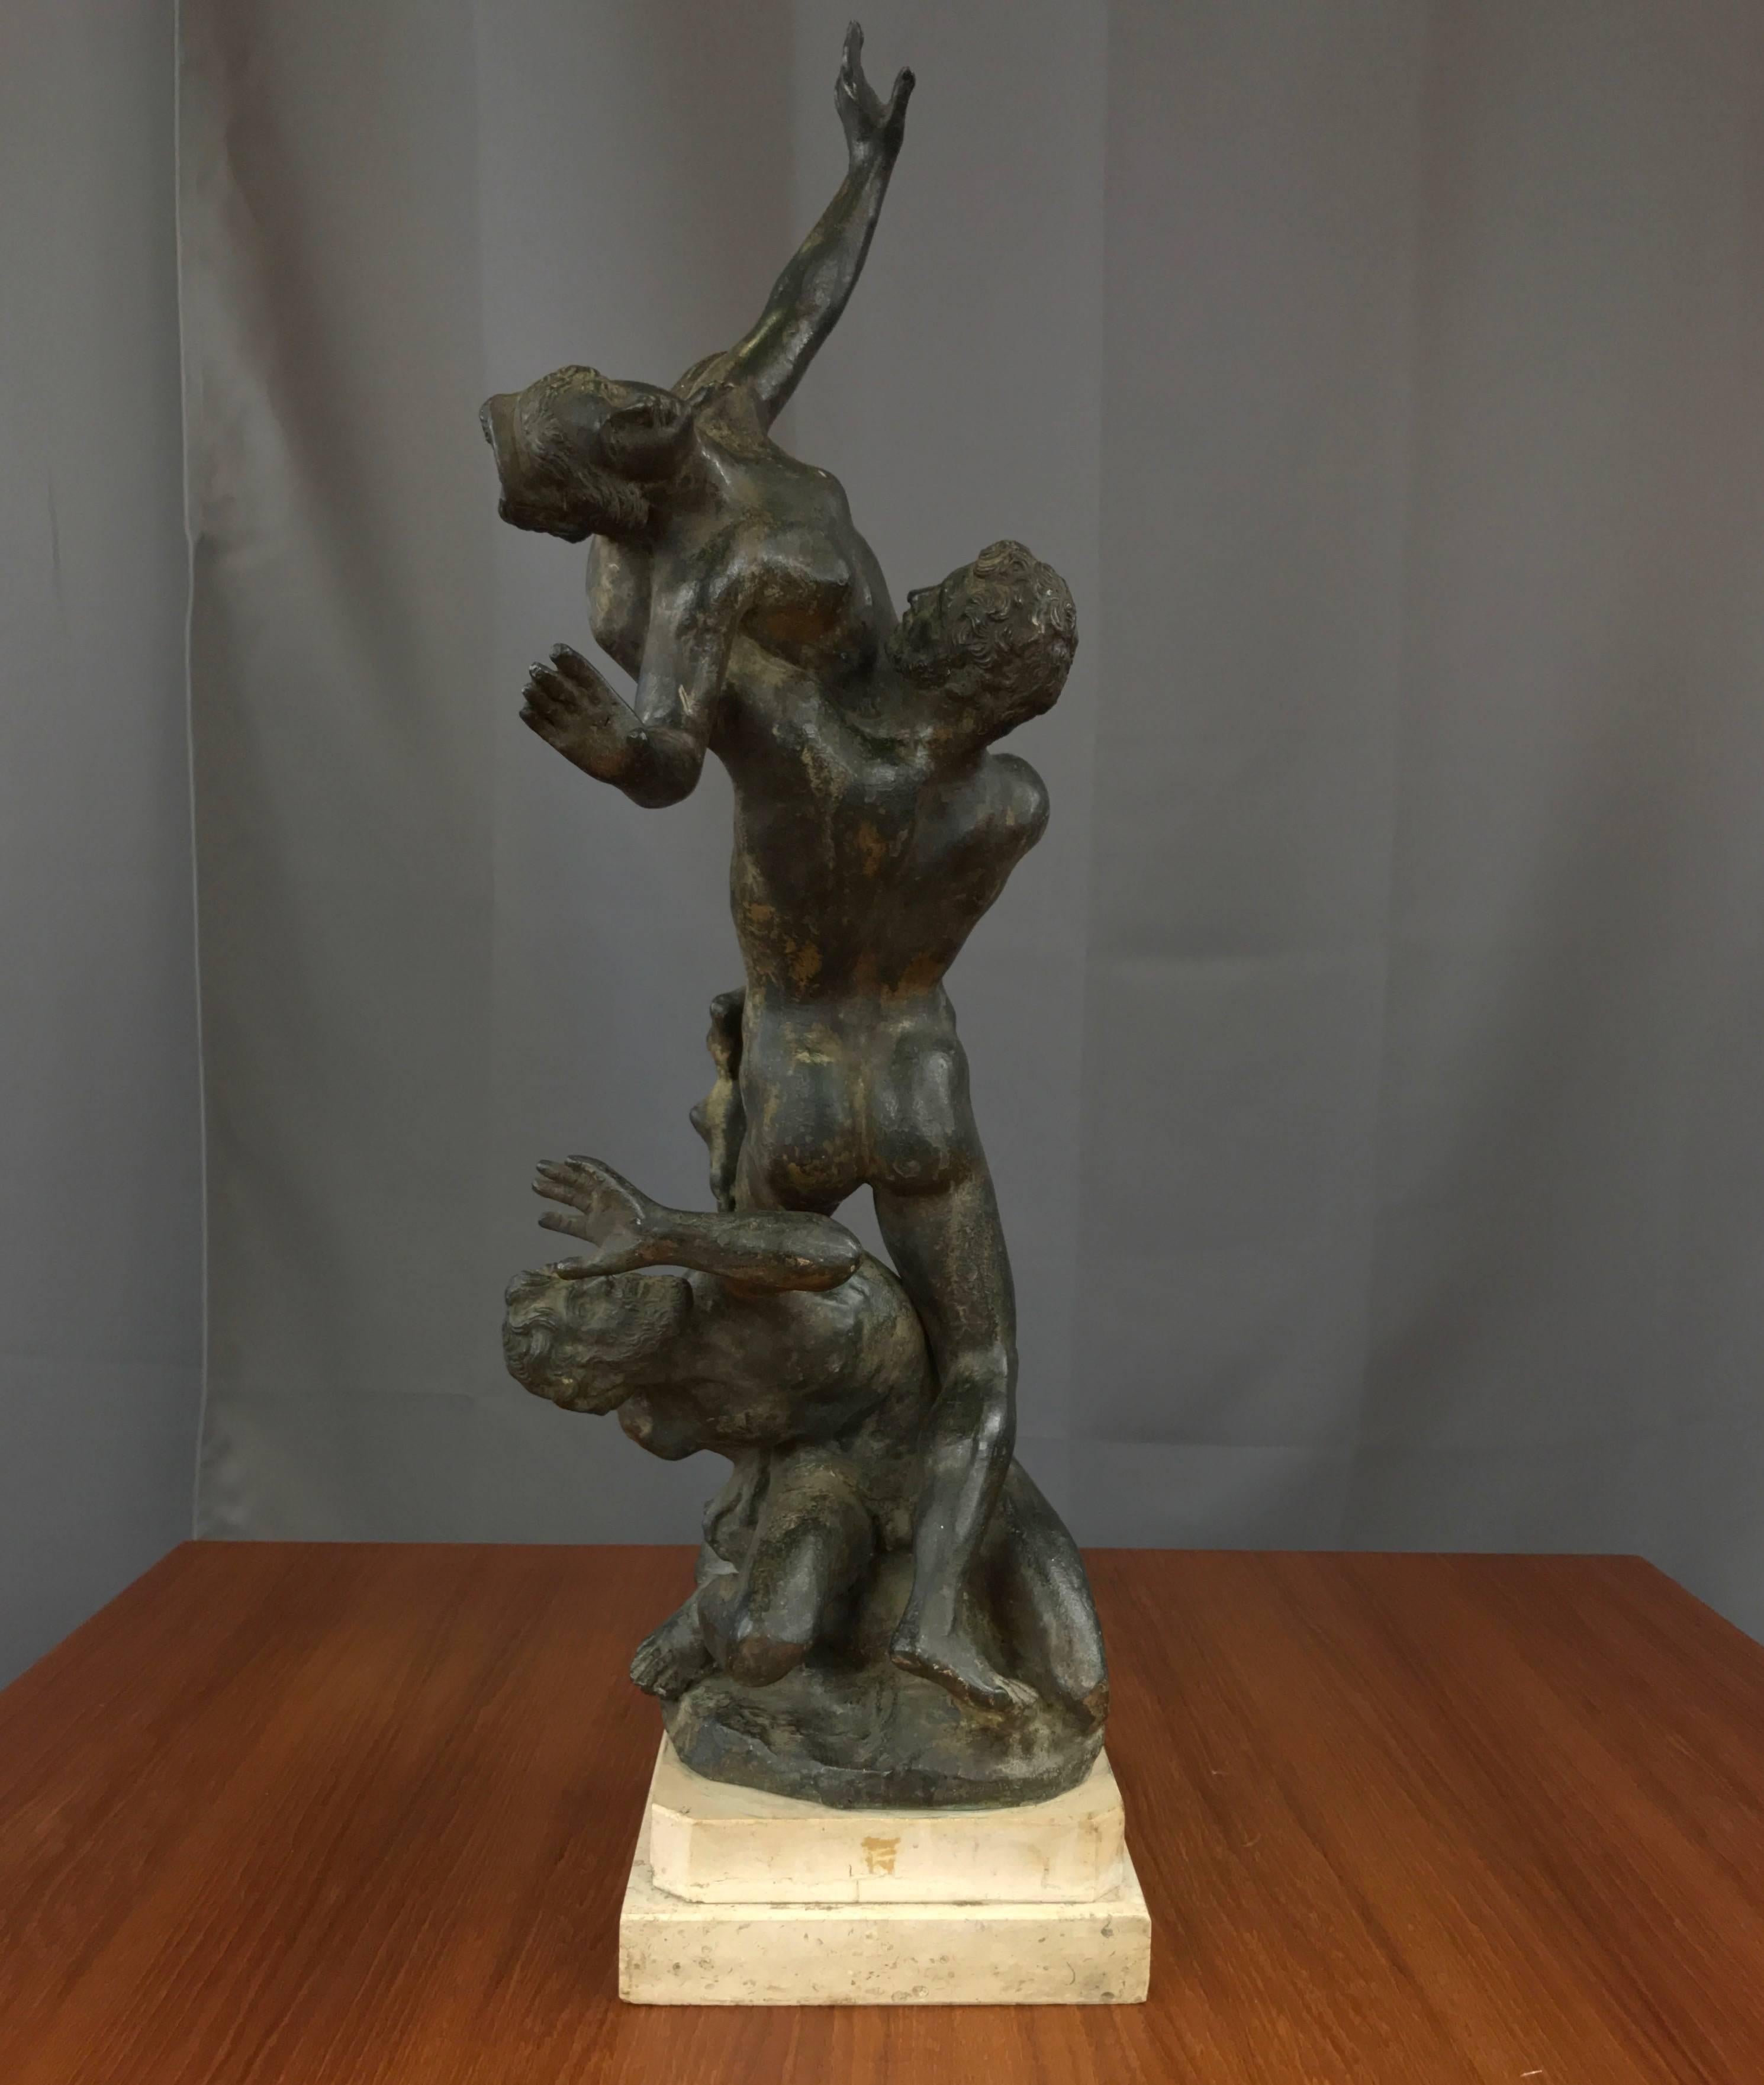 A circa 1940s substantial cast metal sculpture done after Giambologna’s late 16th century masterpiece “Abduction of the Sabine Women”, and attributed to Fonderia Chiurazzi.

Influential Florence-based Flemish sculptor Giambologna (b. 1529–1608)